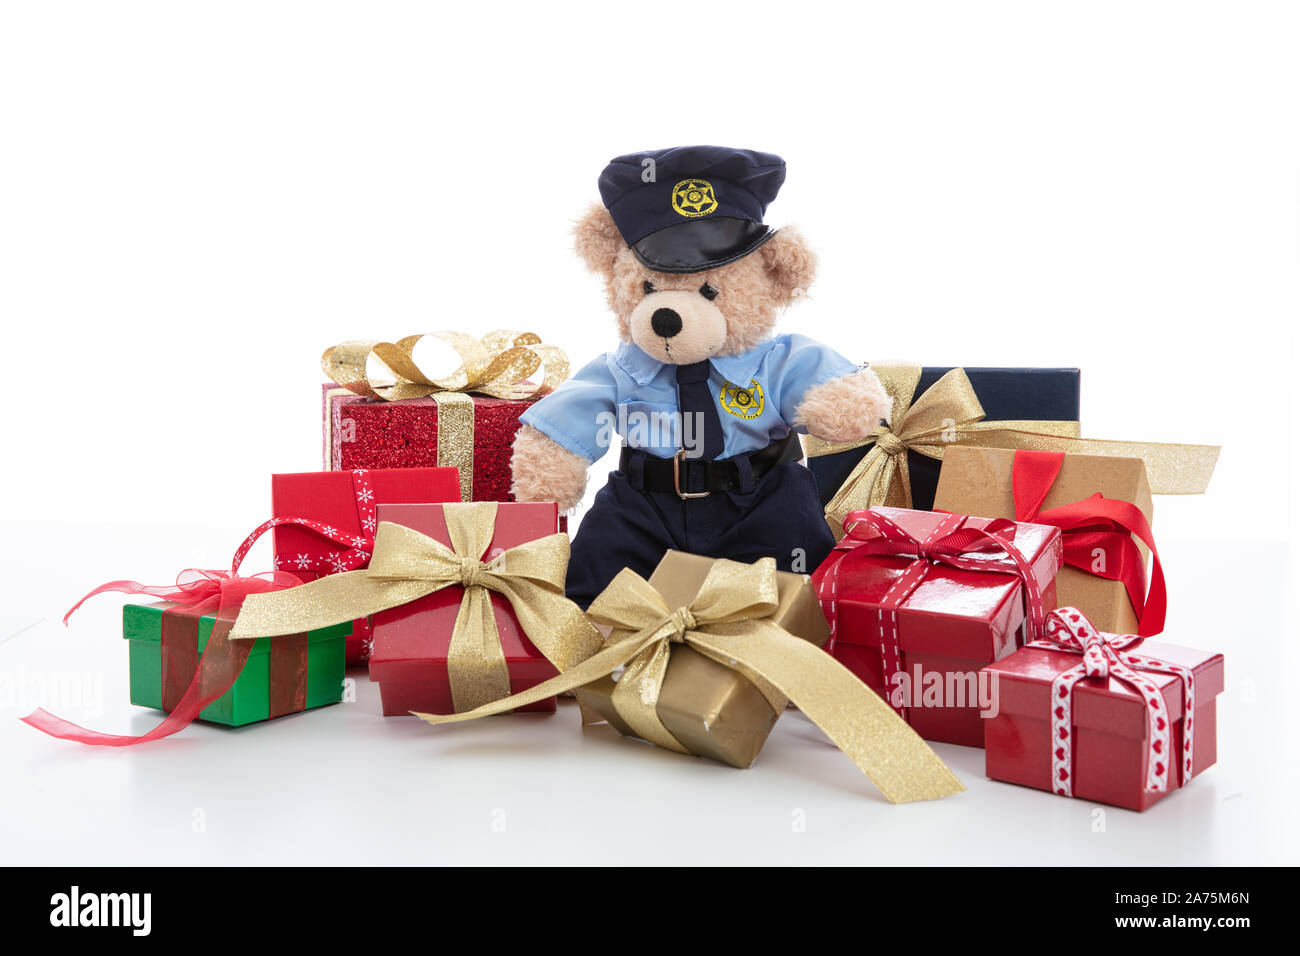 Police and christmas concept. Cute teddy bear in police officer uniform and xmas gift boxes isolated against white background Stock Photo